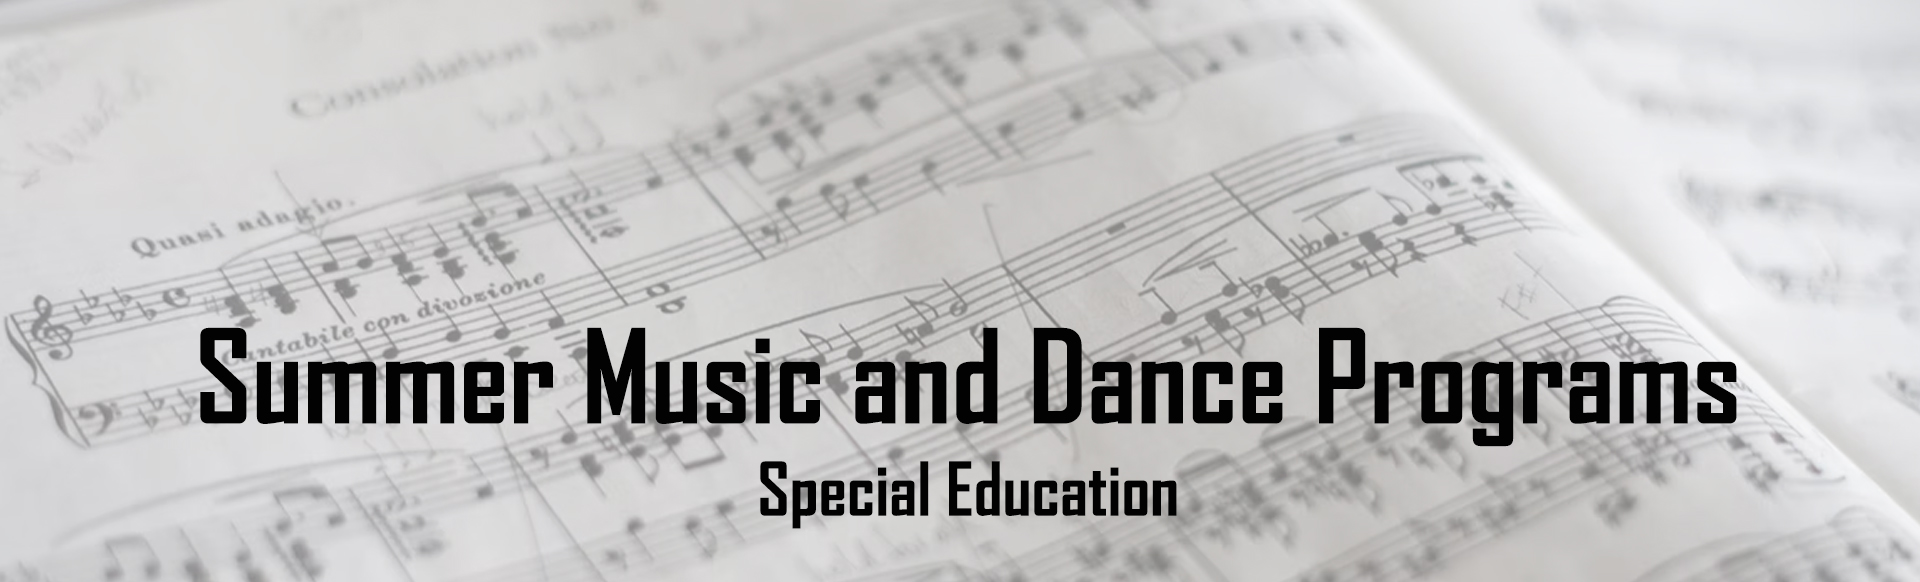 Summer Music and Dance Programs